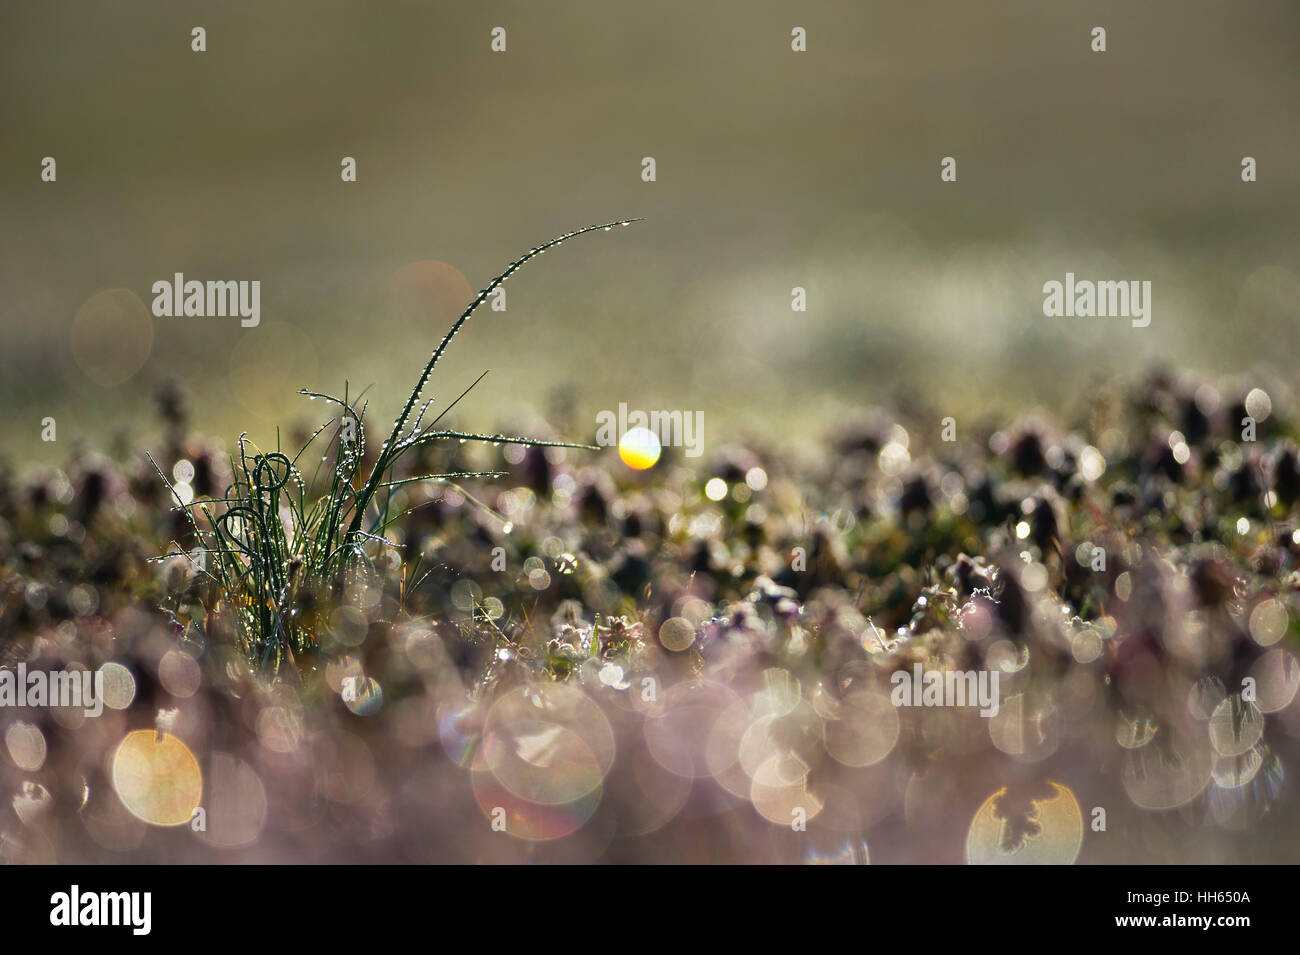 A clump of tall grass wet with morning dew stands out in an open field glowing in the morning sun. Stock Photo